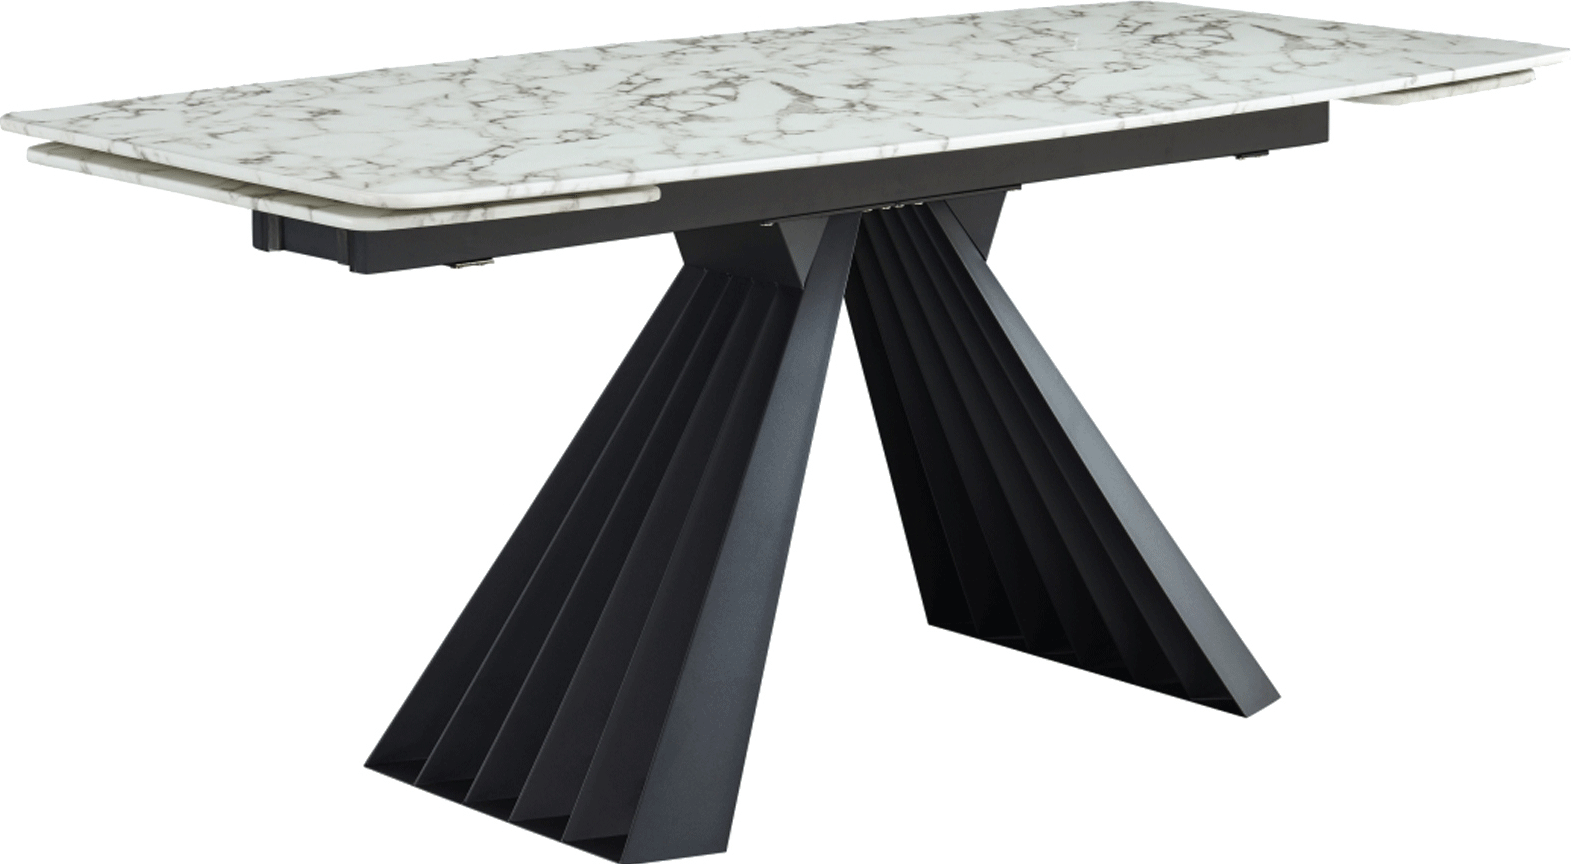 Wallunits Entertainment Centers 152 Marble Dining Table